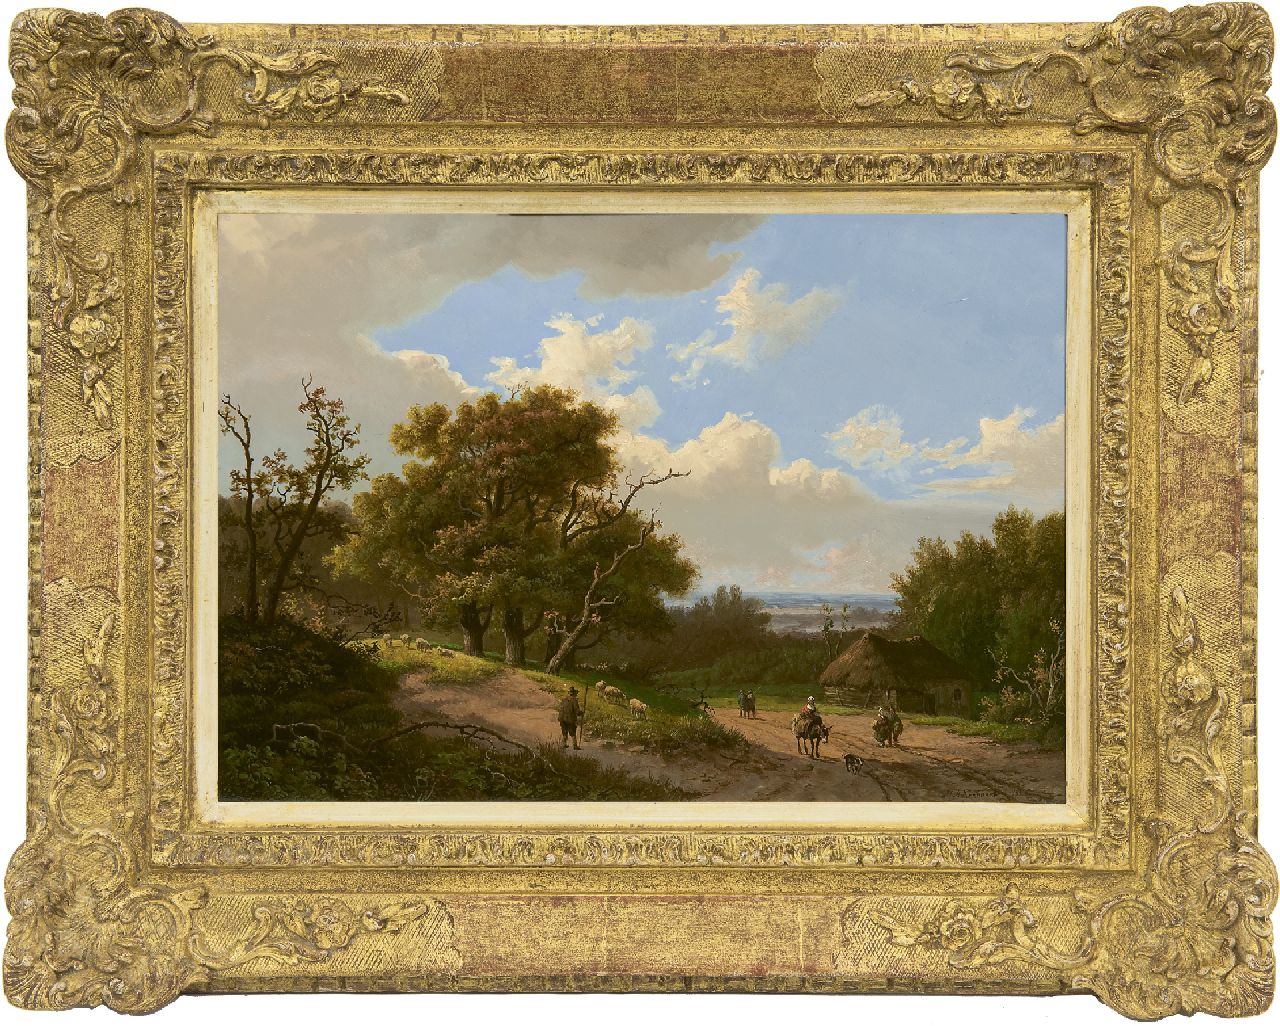 Koekkoek I M.A.  | Marinus Adrianus Koekkoek I | Paintings offered for sale | A wooded landscape with a shepherd and his flock, oil on panel 24.5 x 34.9 cm, signed l.r. and dated 1851